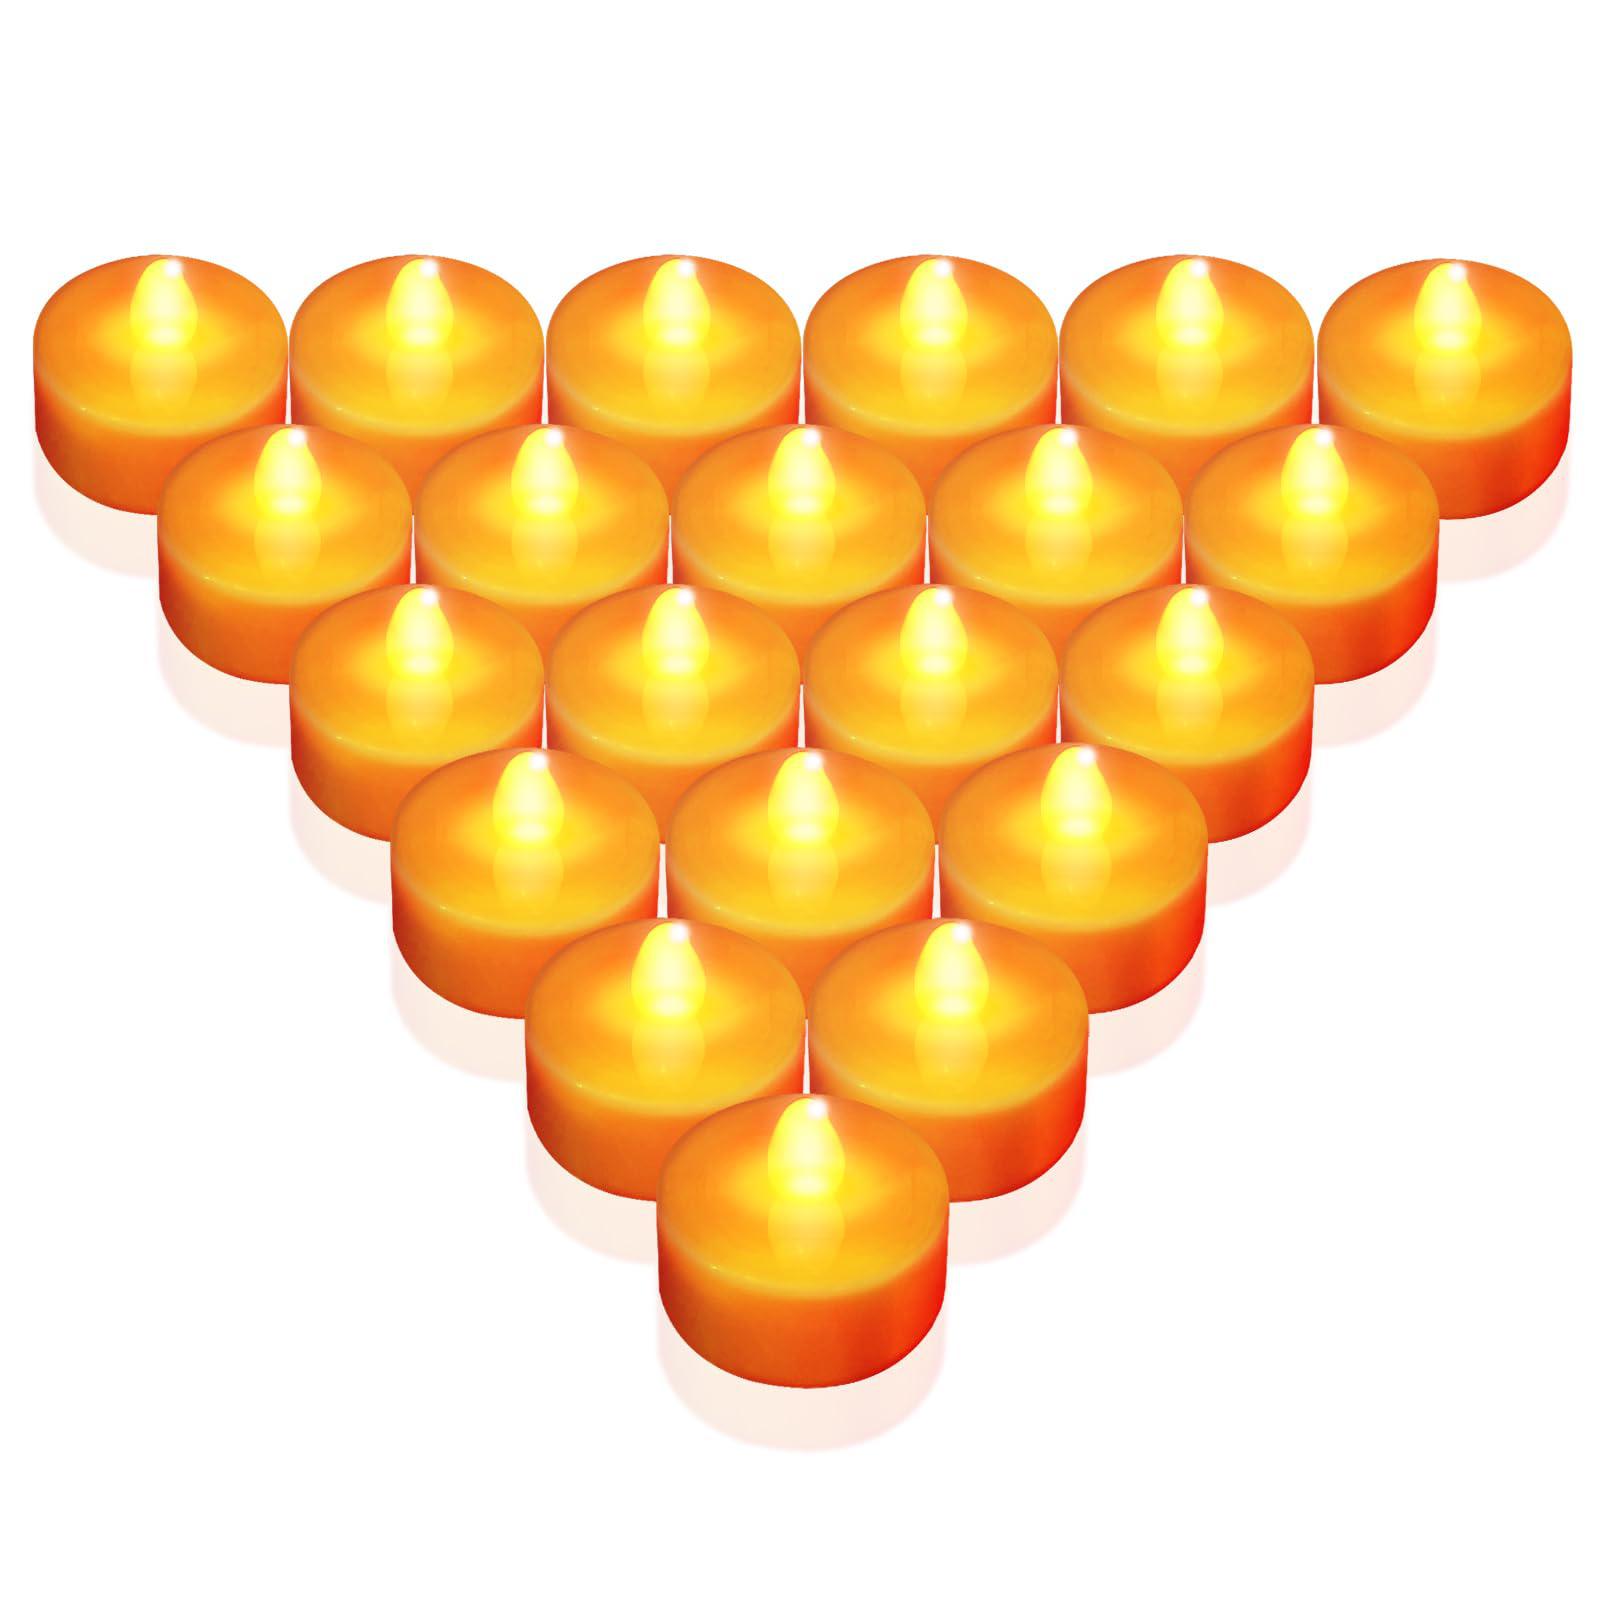 YASUOO flameless, led tea light candles with battery-powered wedding decorations for parties events tealight candles (24 pack)